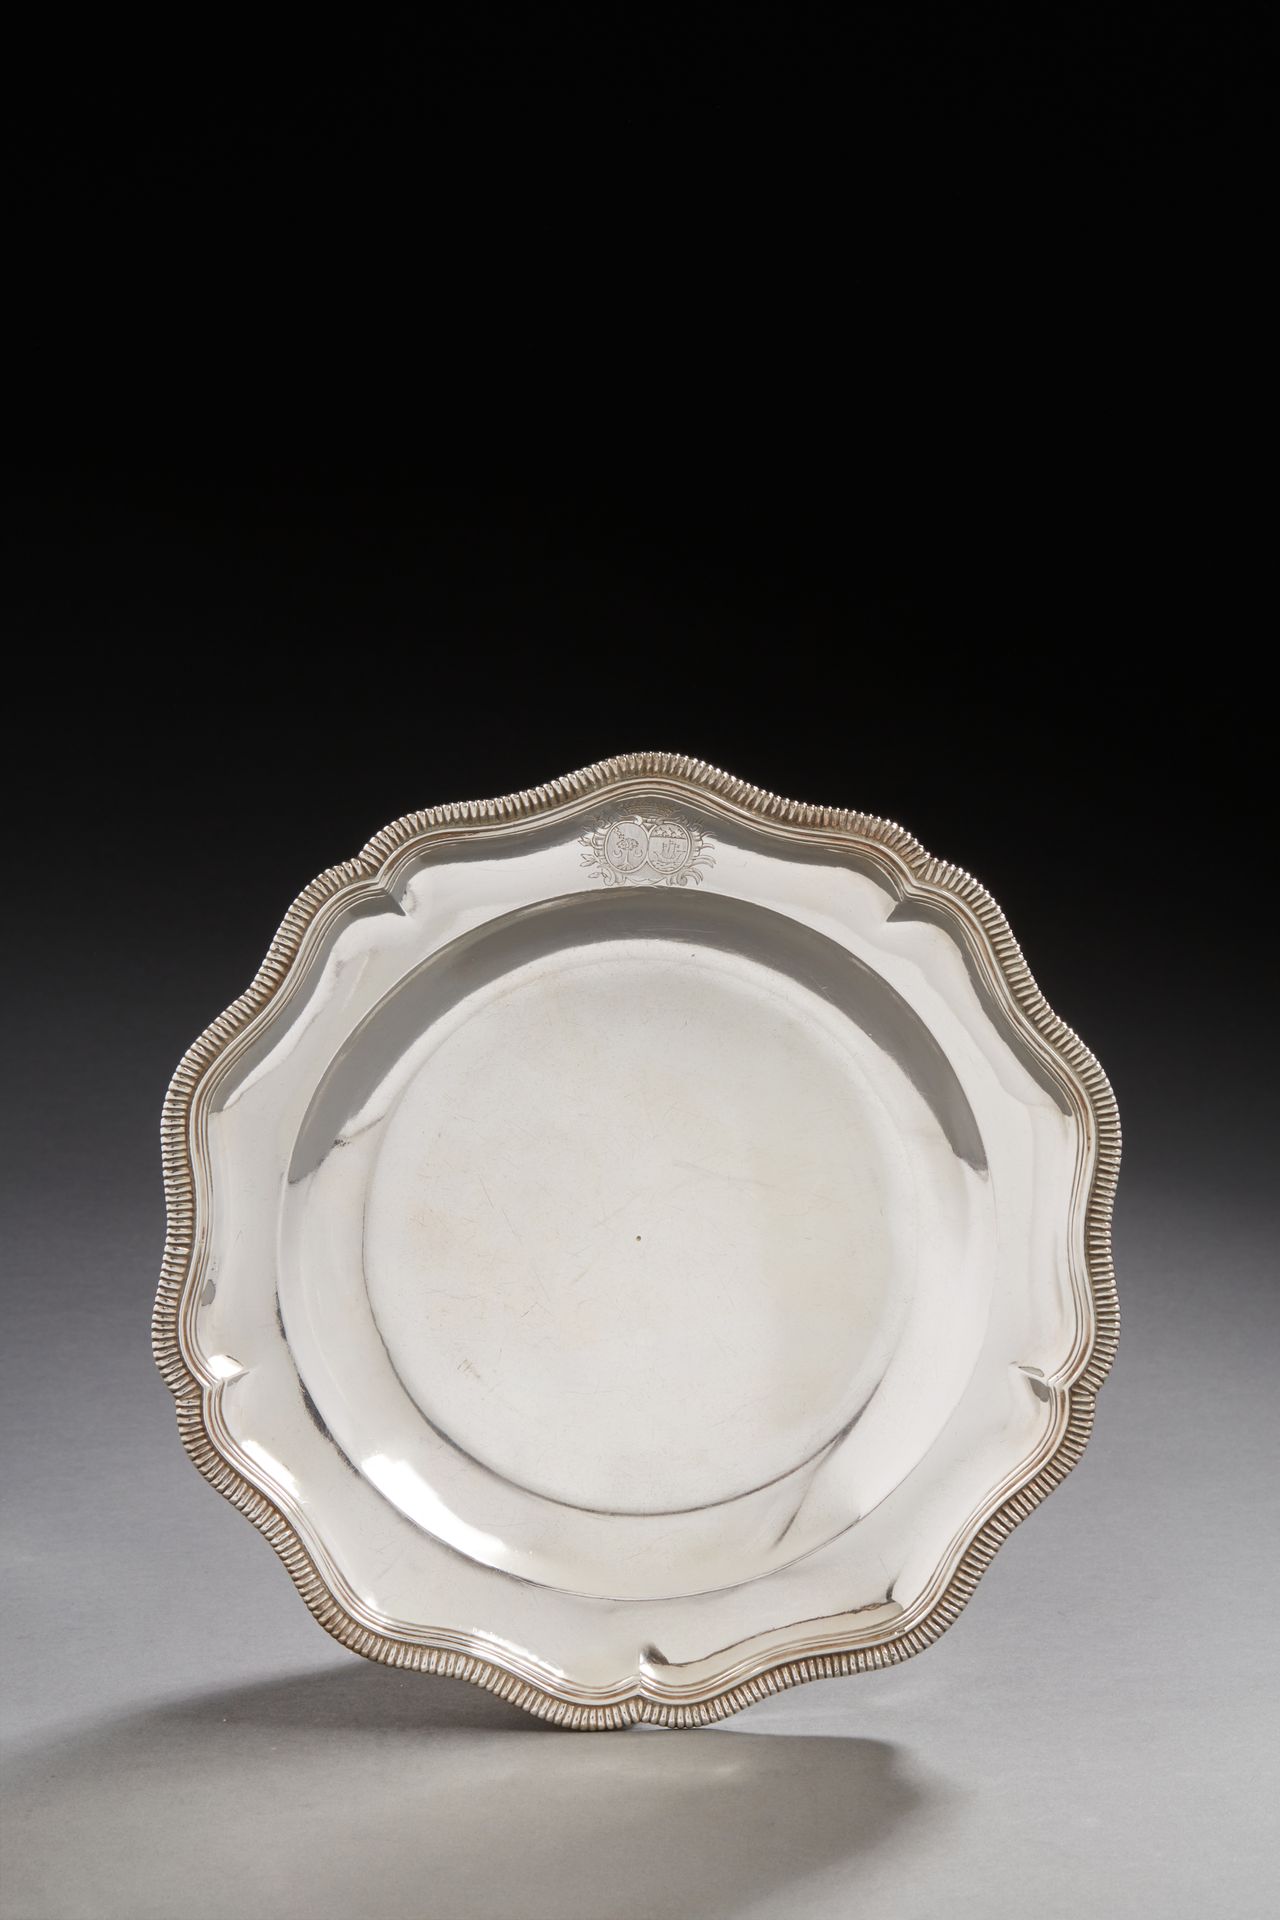 Null PARIS 1739 - 1740
A silver plate with five contours moulded with fillets bo&hellip;